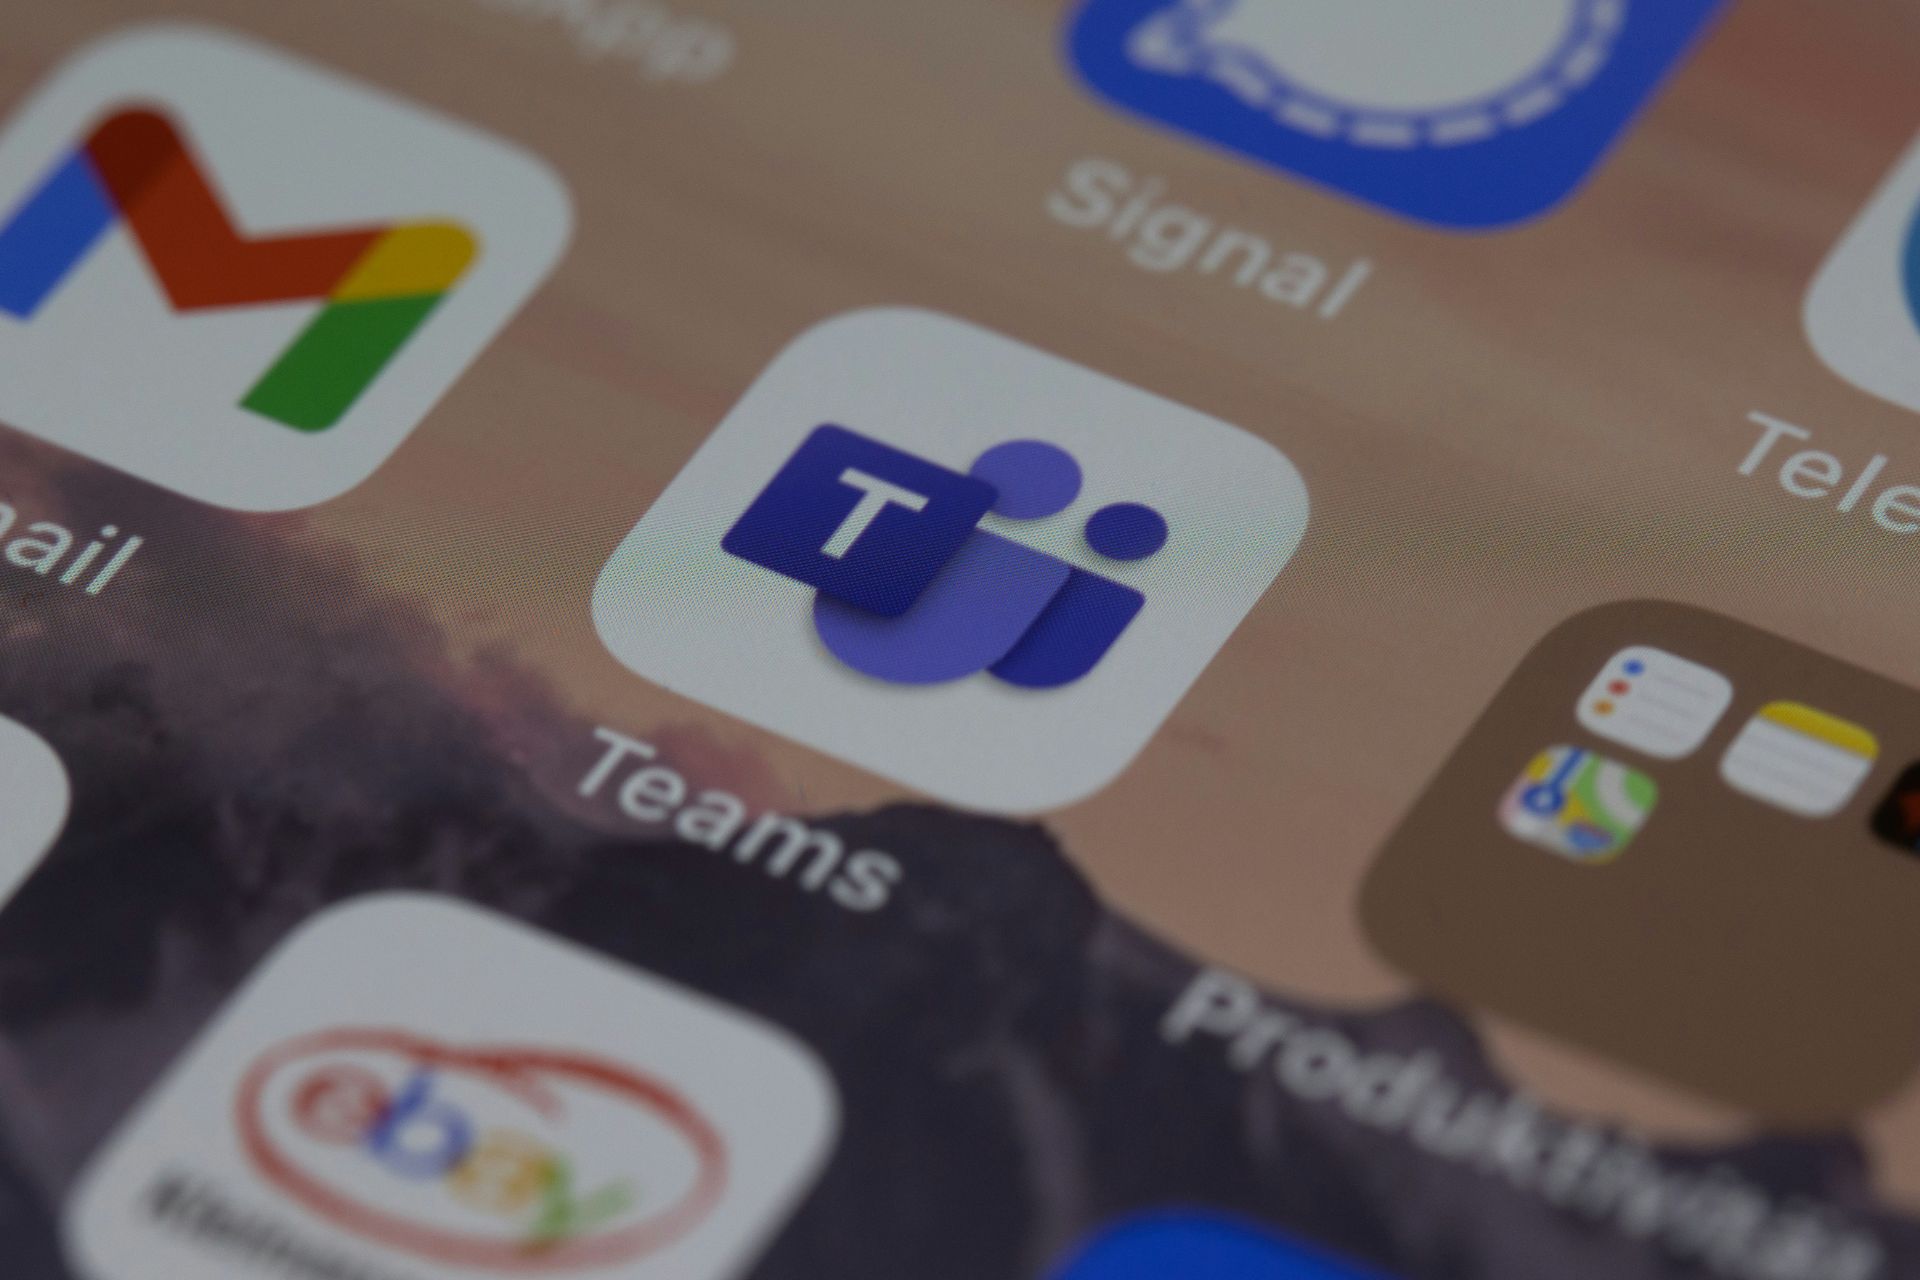 Microsoft Teams will soon provide unified app management across Teams, Outlook, and Microsoft 365